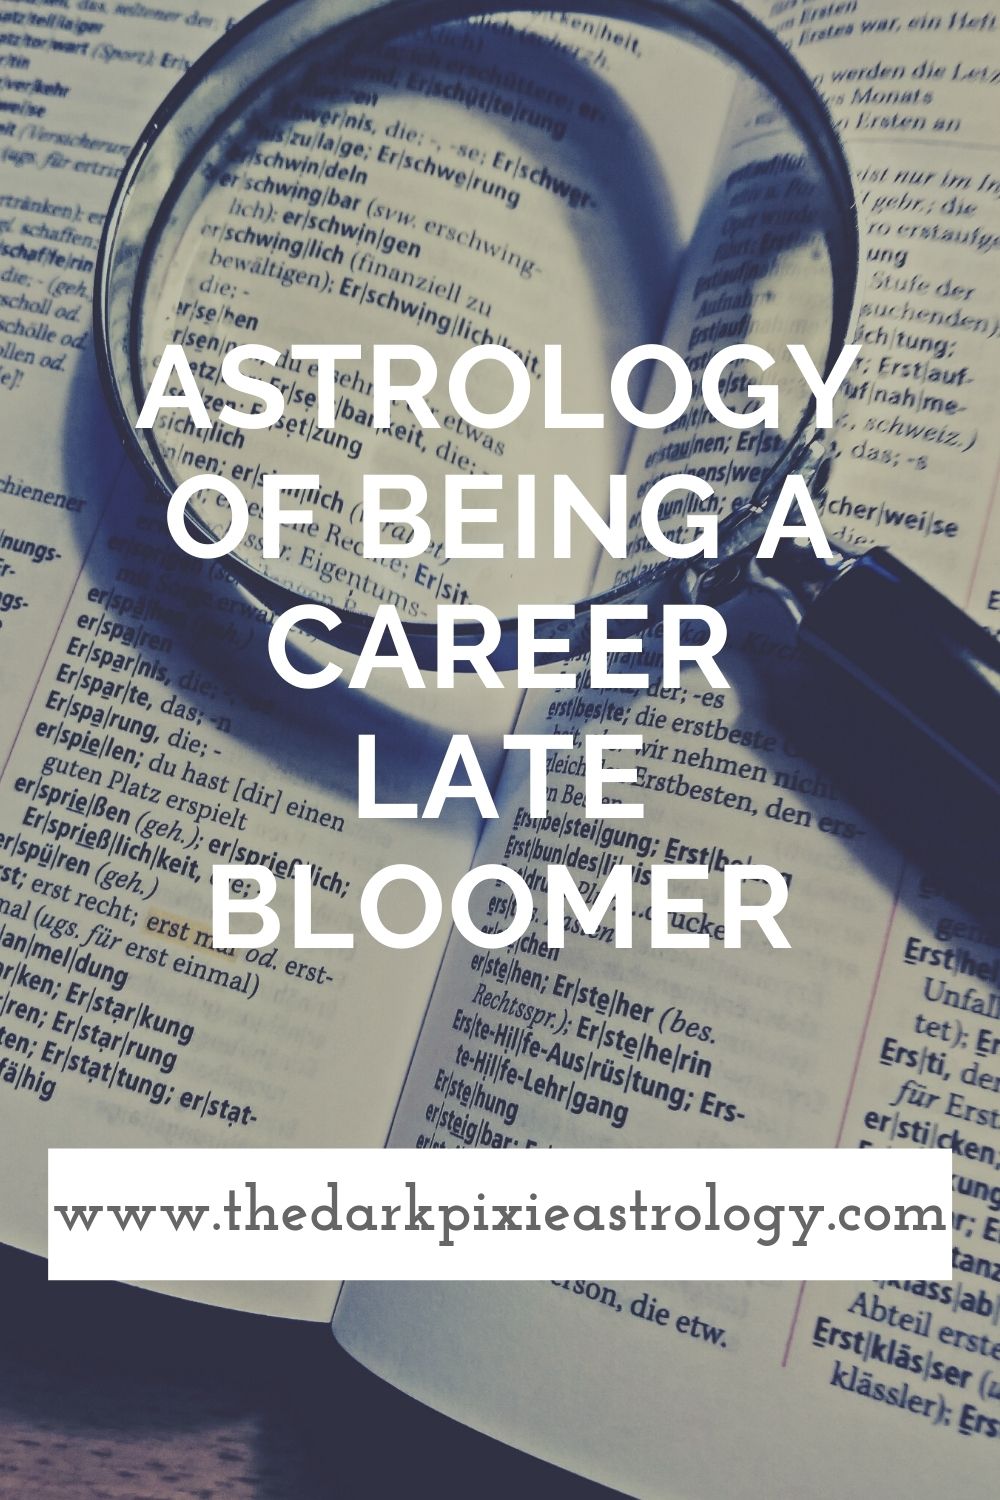 Astrology of Being a Career Late Bloomer - The Dark Pixie Astrology